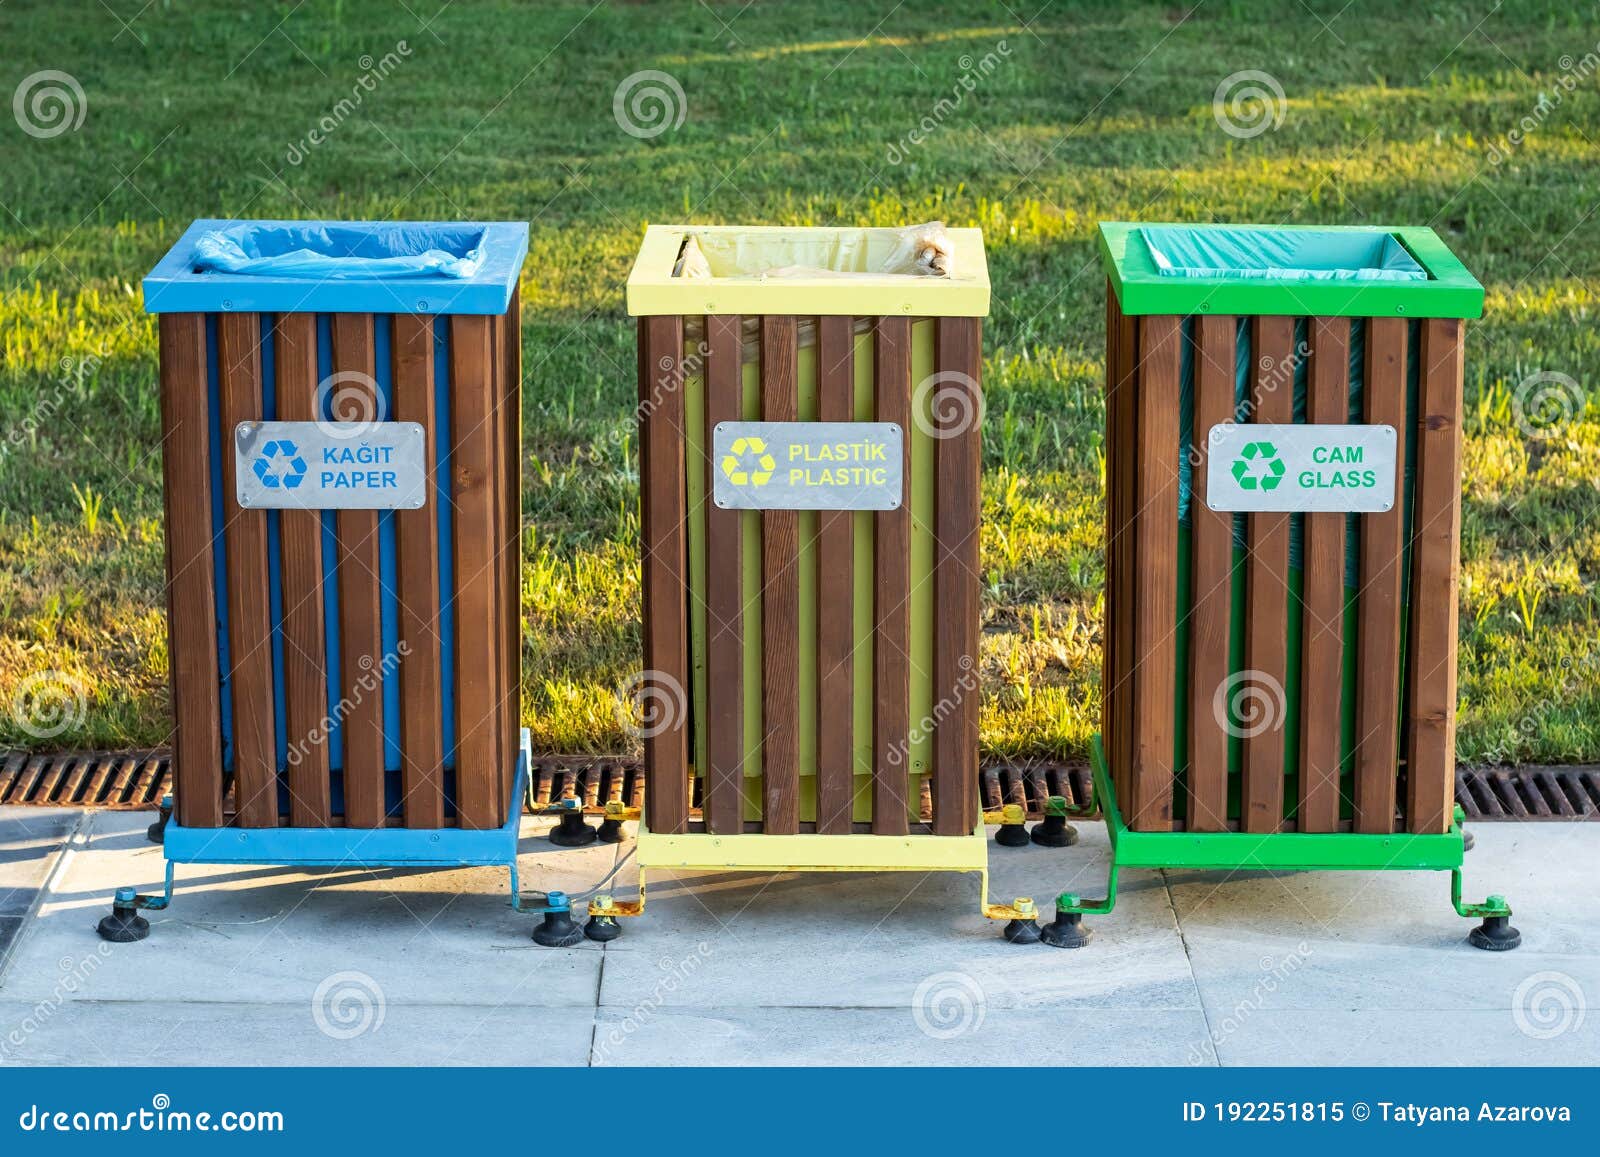 https://thumbs.dreamstime.com/z/recycling-bins-different-colors-yellow-green-blue-outdoors-garbage-bin-park-trash-can-green-grass-background-192251815.jpg